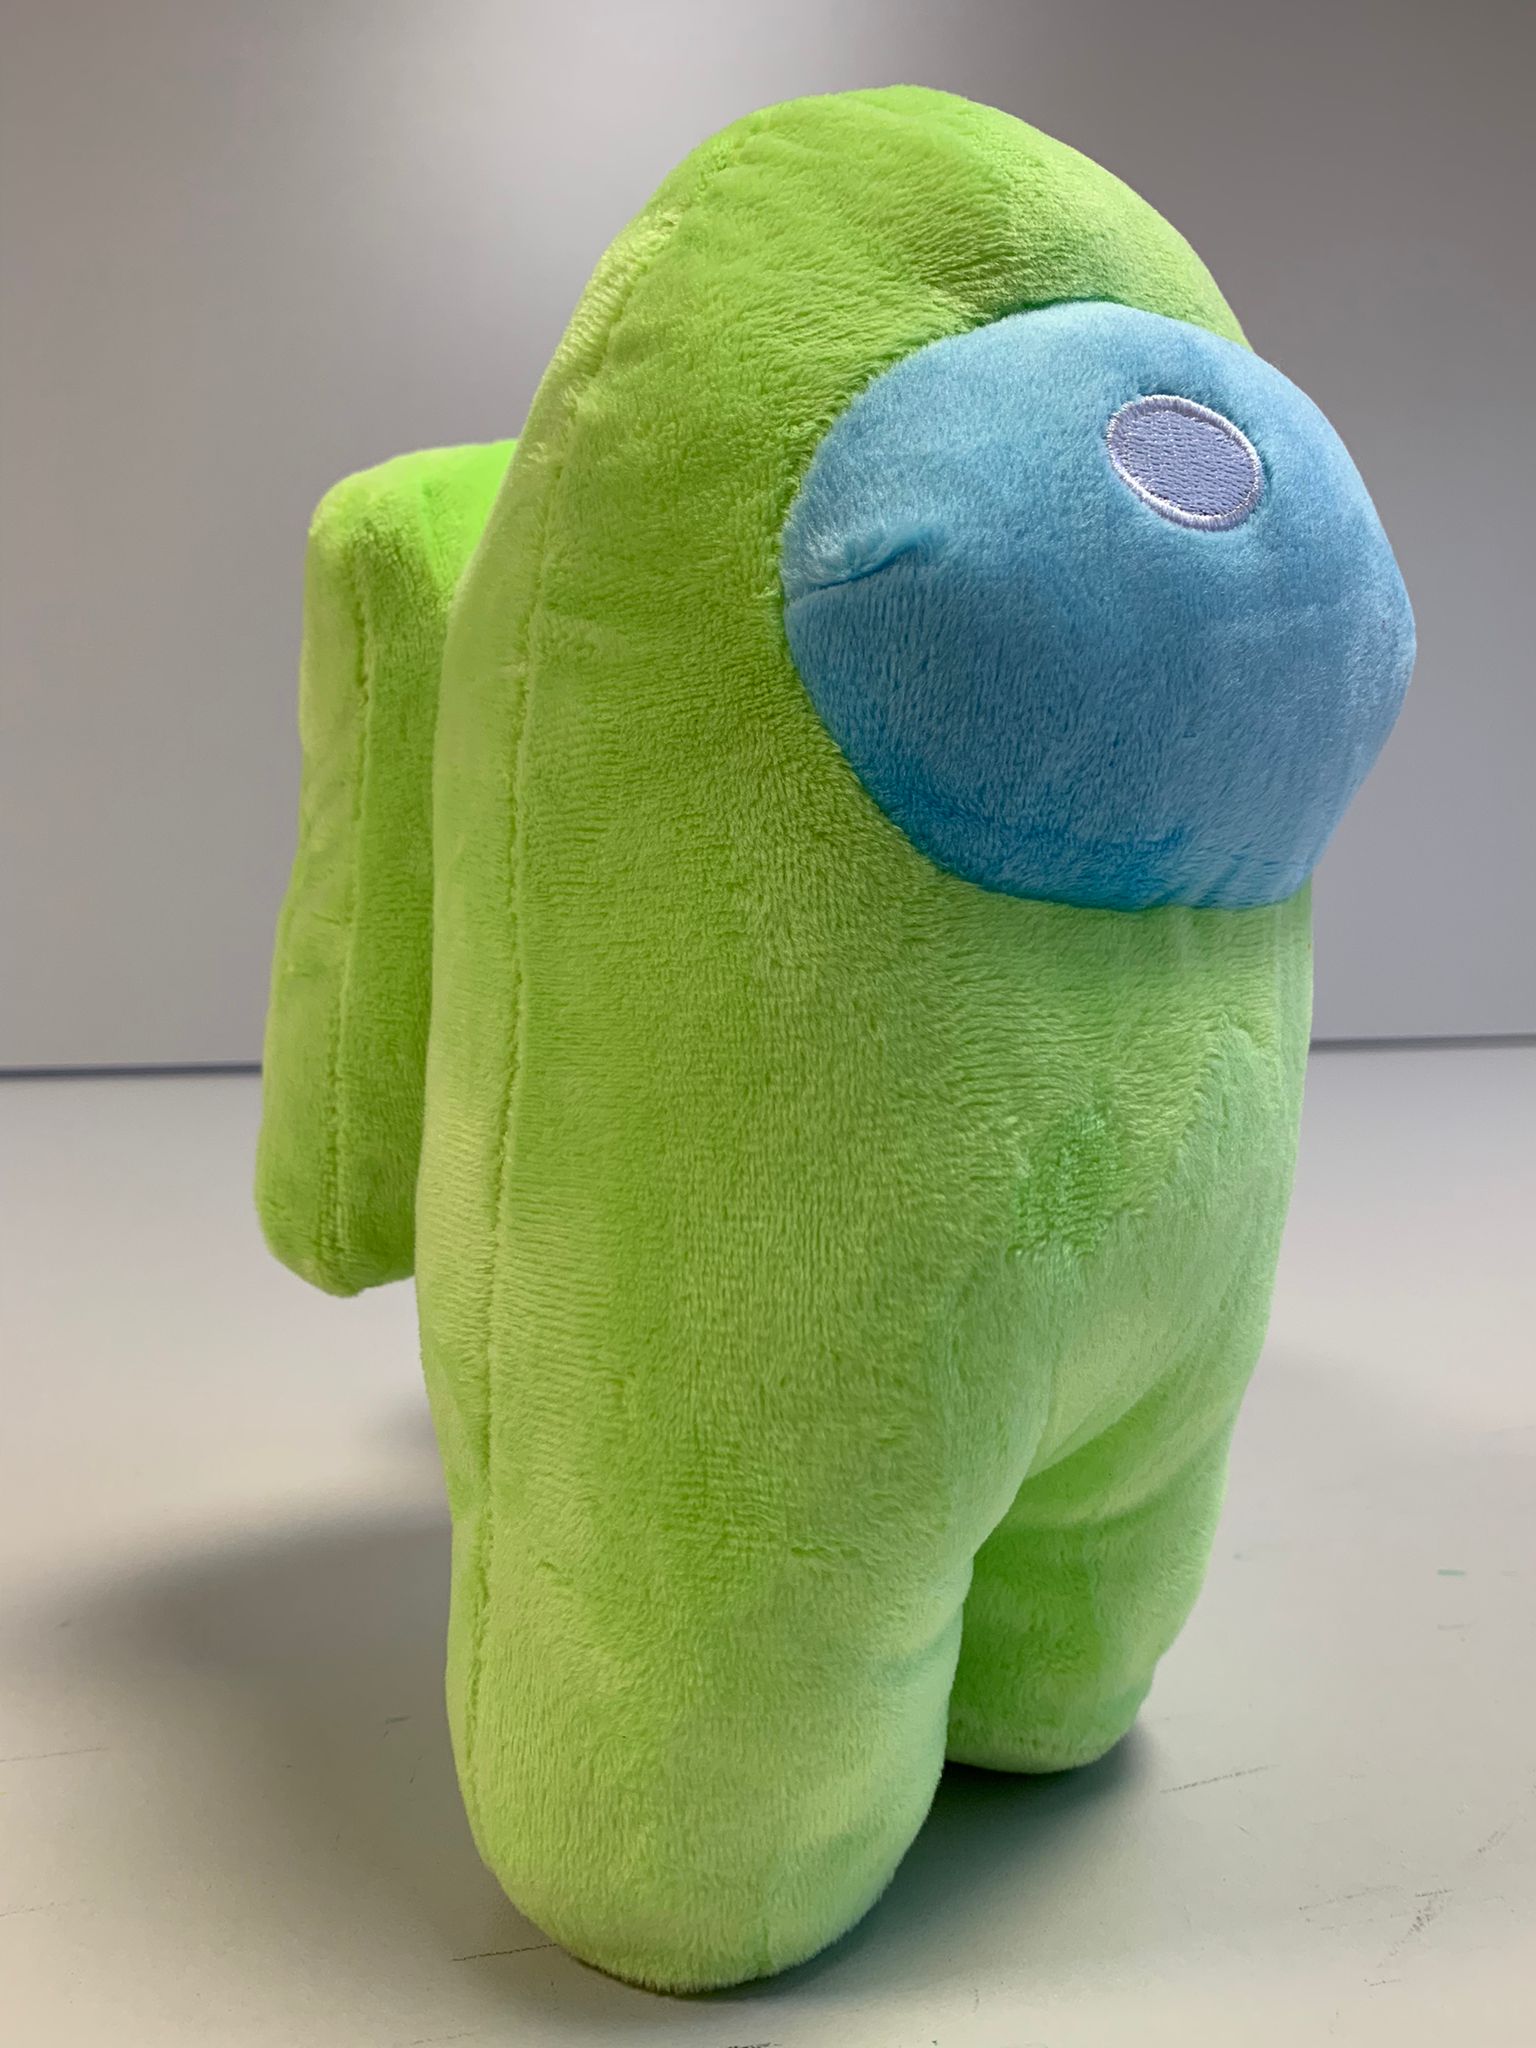 Plush character from the game Among Us, small, green